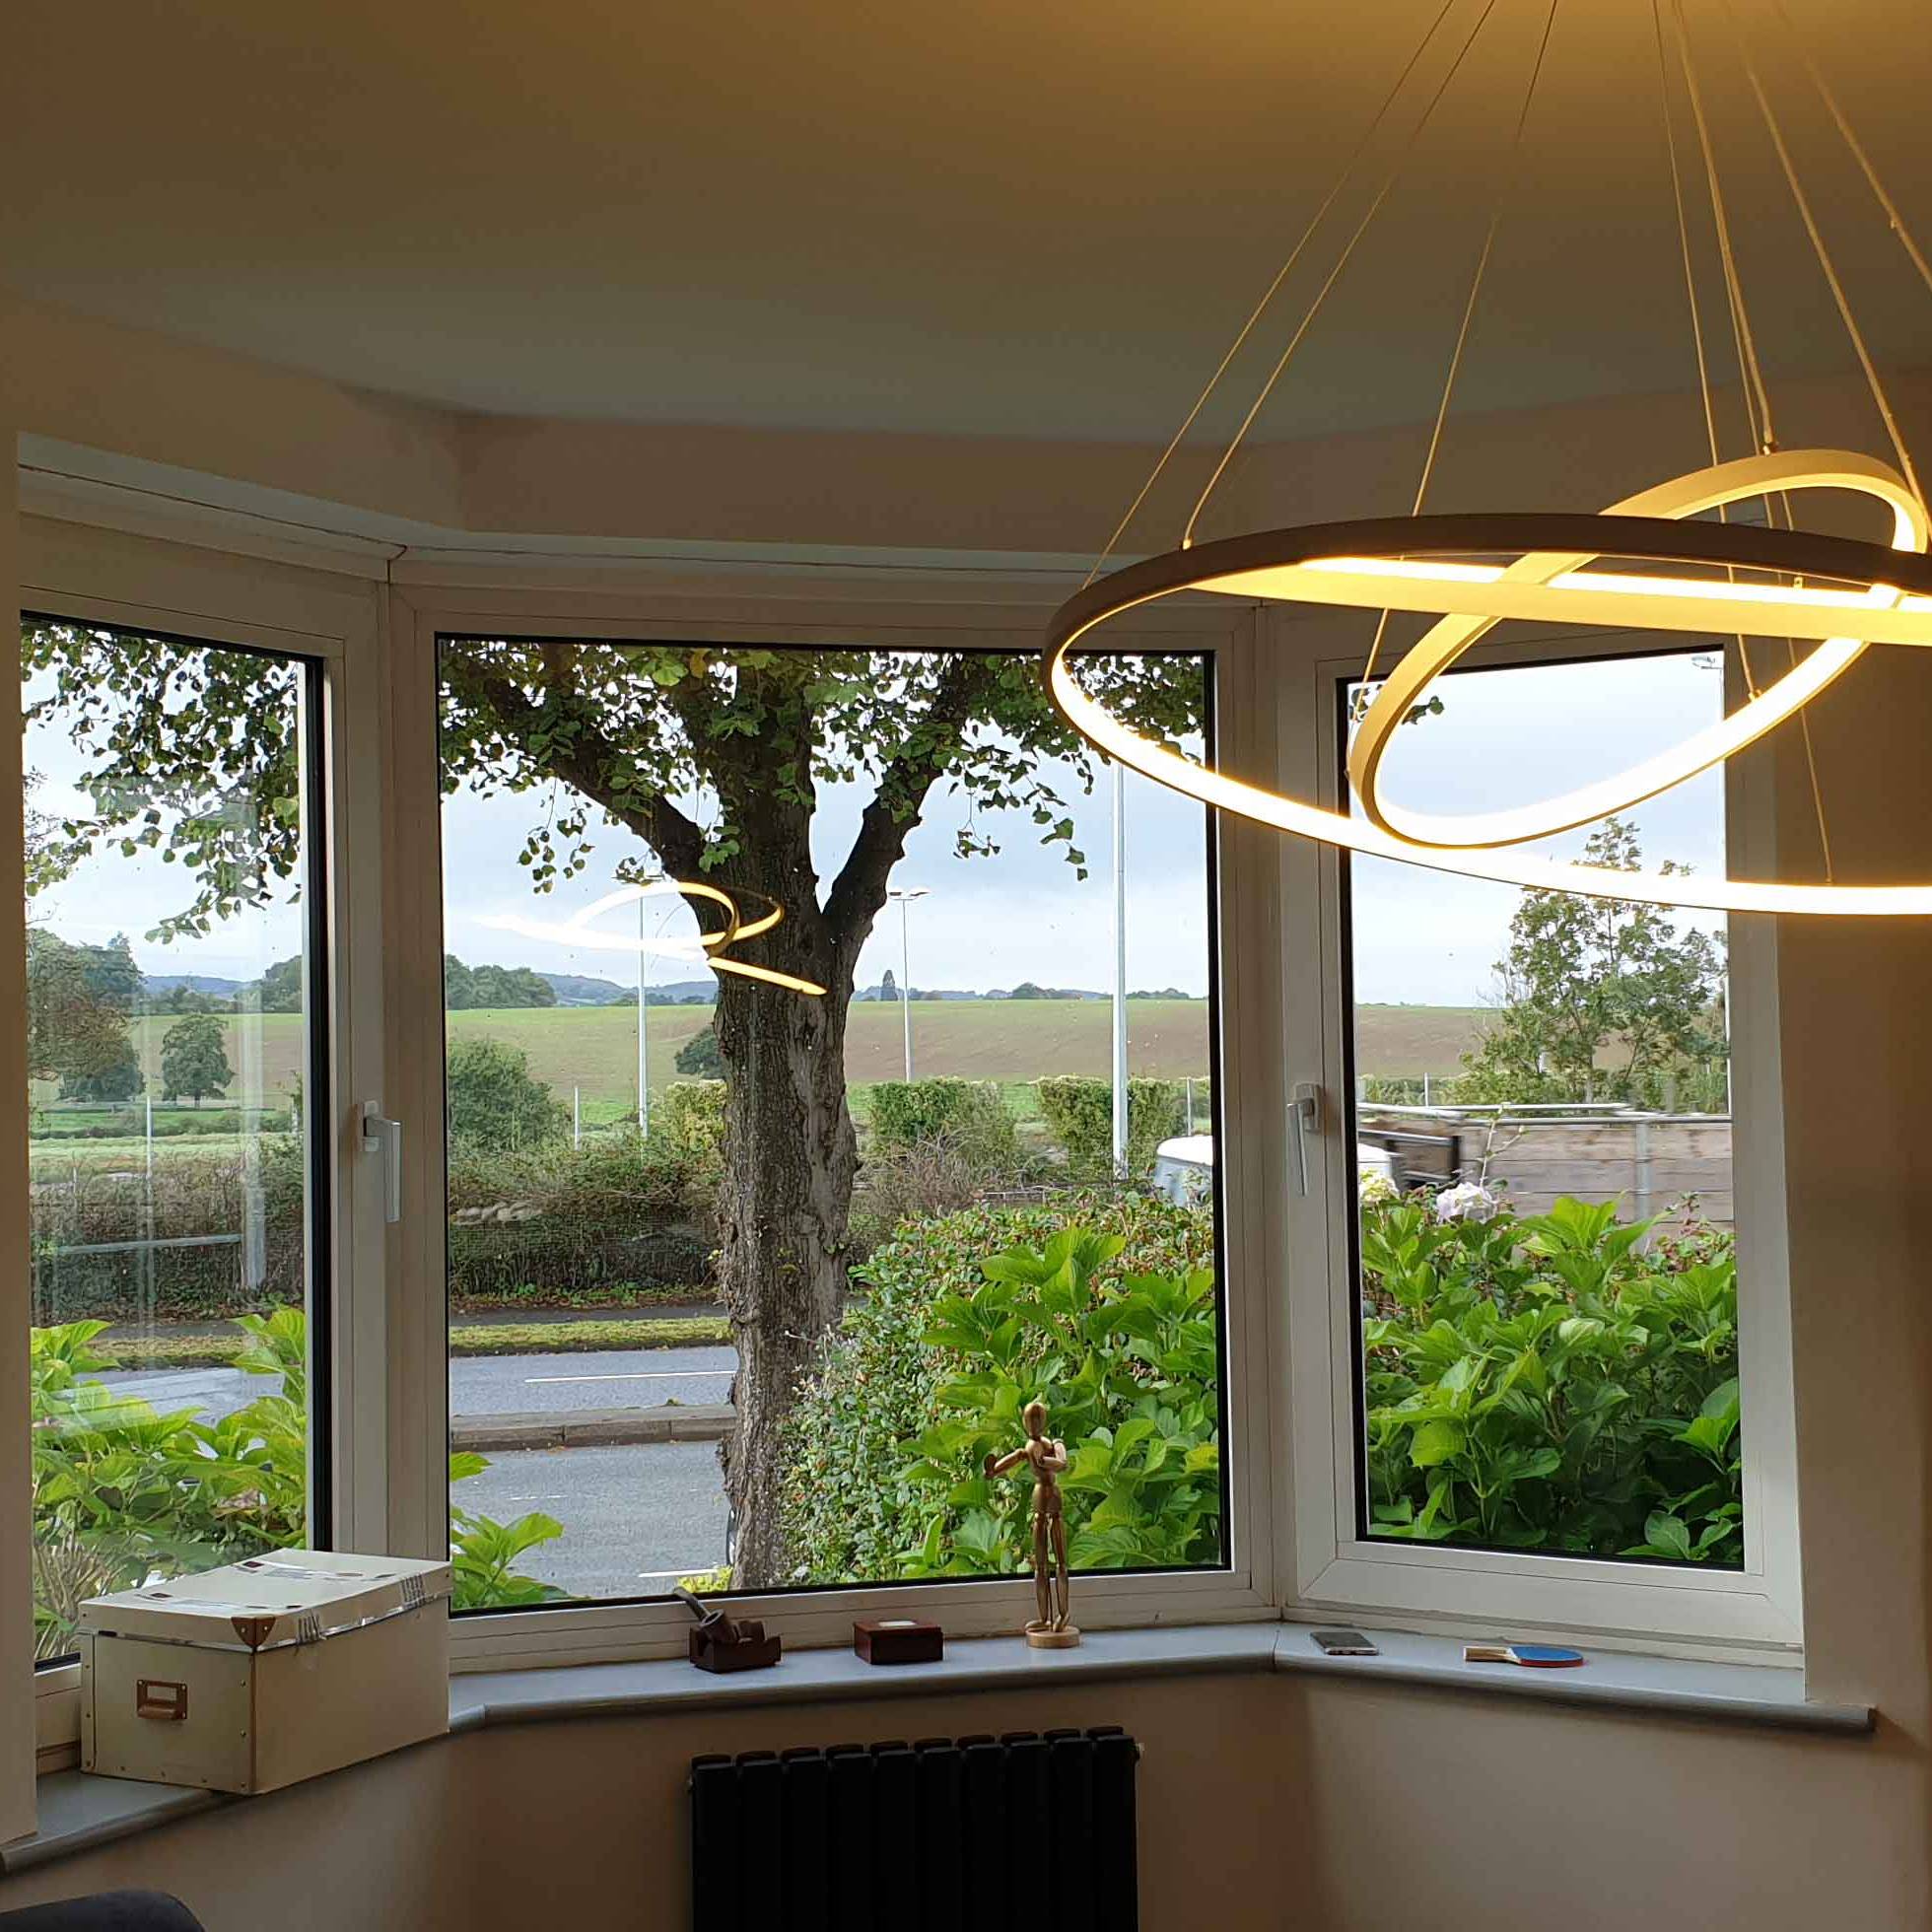 Cleverspark Electrical Installers and Electrians based in Bristol, Bath and the South West of England - An example of interior light fixtures/fittings